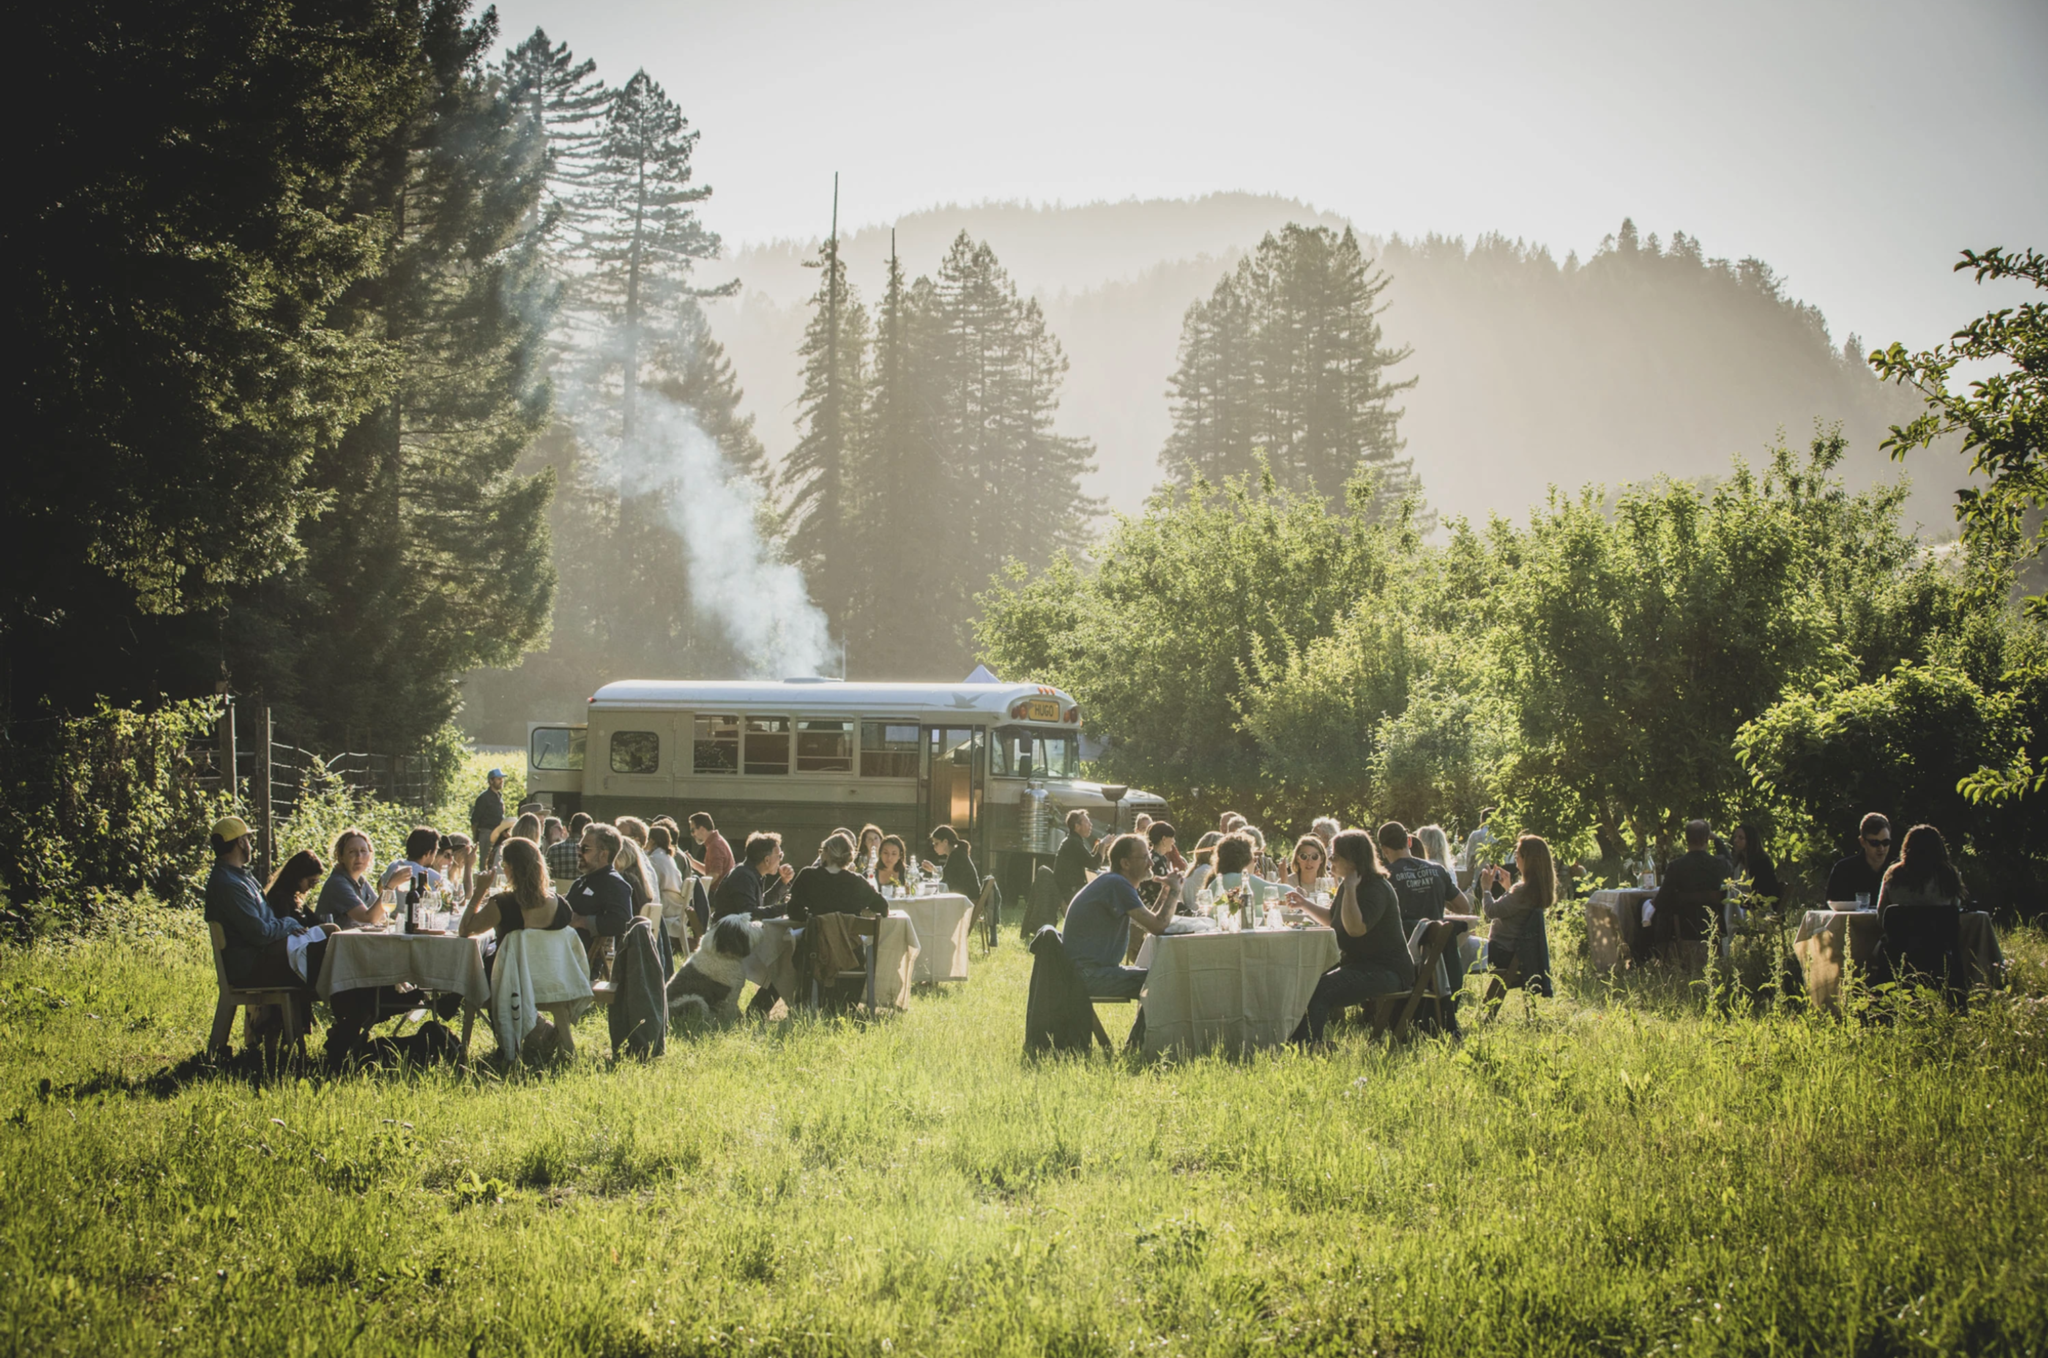 Groups seated on tables in field with bus and redwood trees in background. 